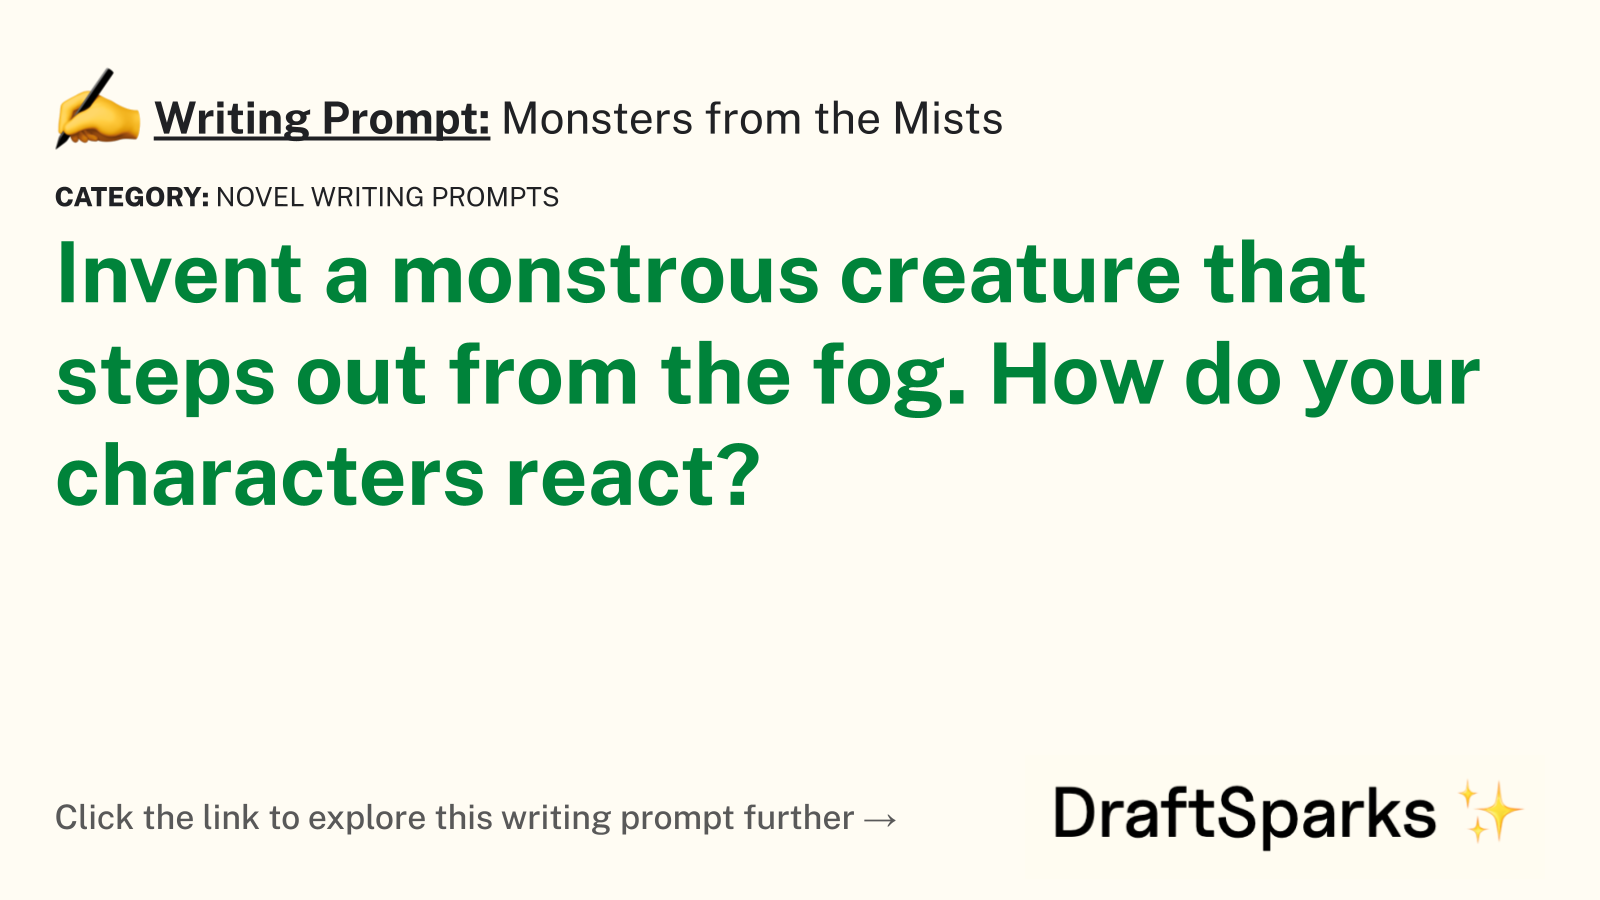 Monsters from the Mists